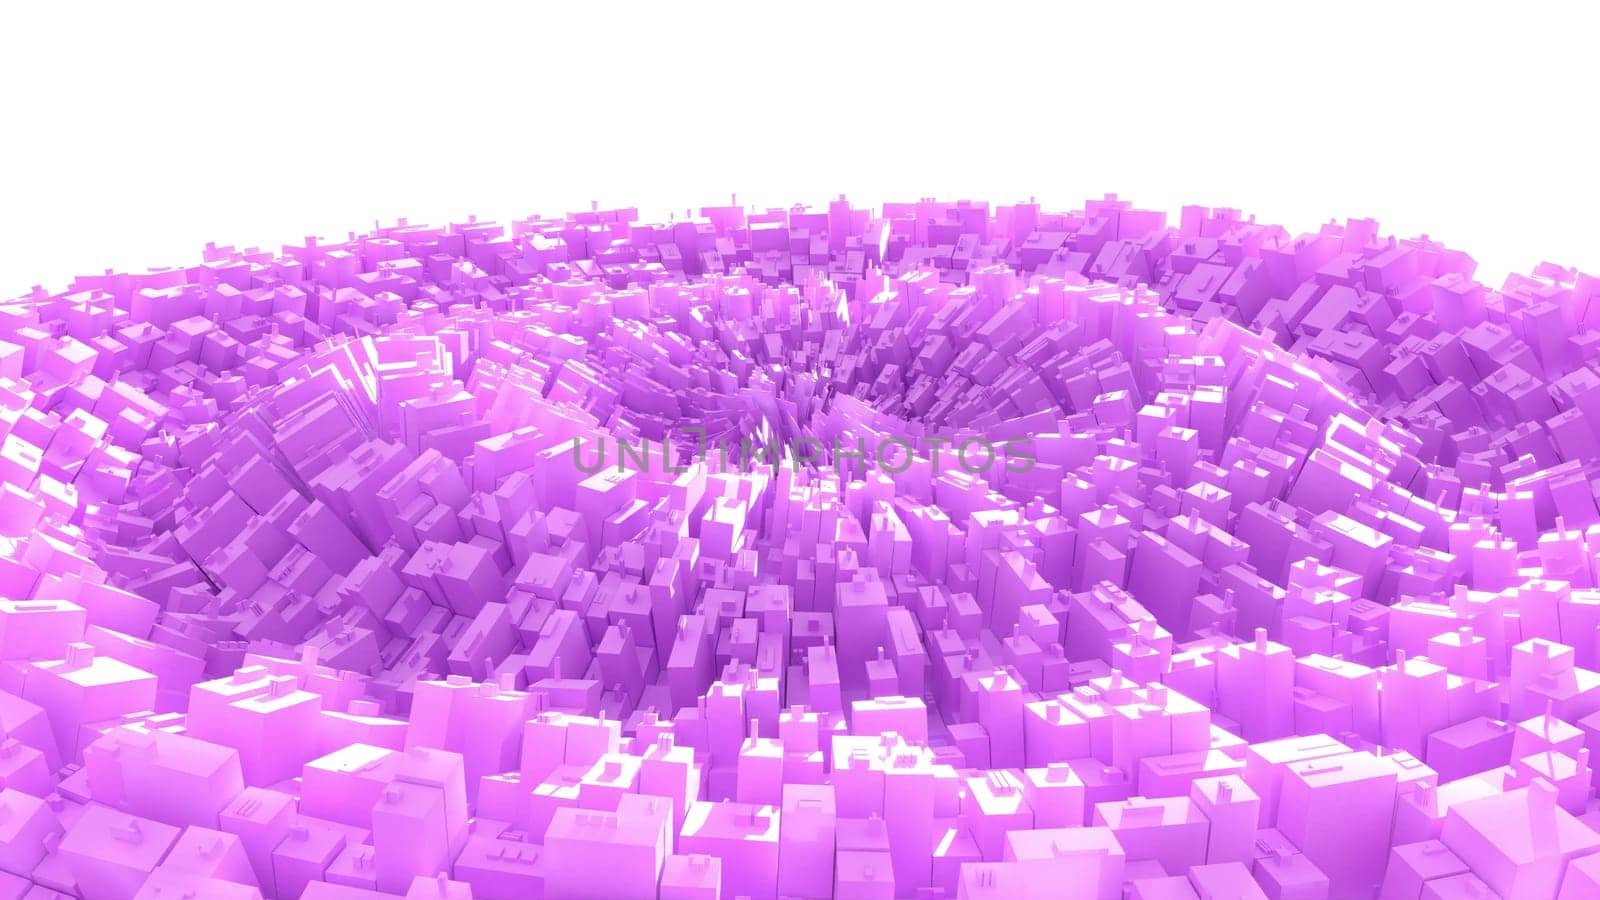 Wave of pink boxes intro 3d render by Zozulinskyi